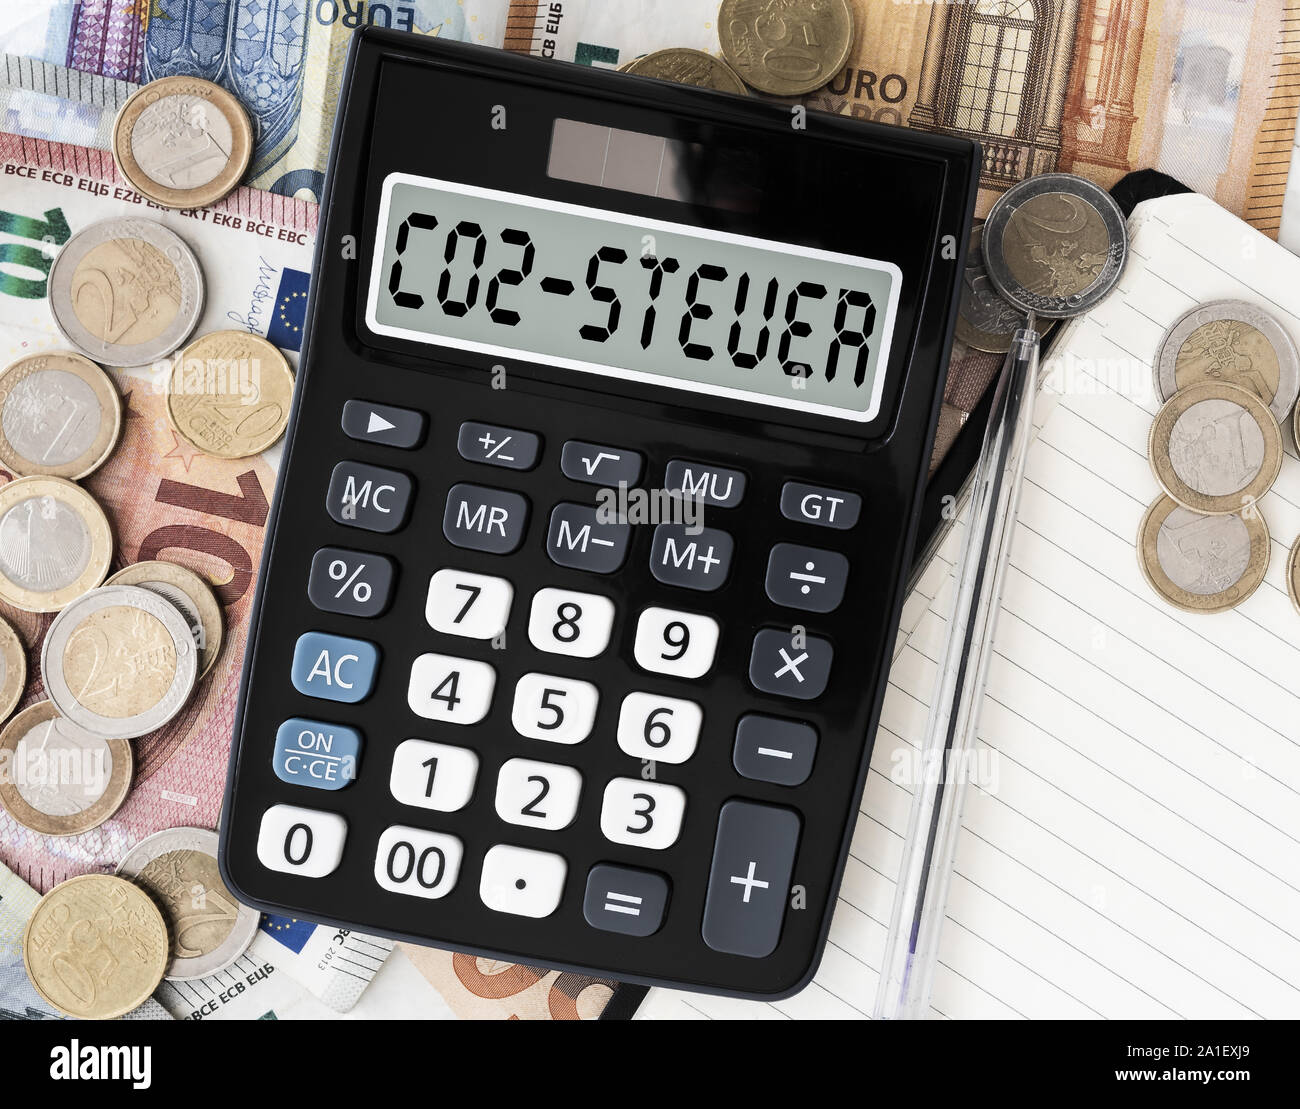 close-up of text CO2 Steuer, German for carbon tax, on display of pocket calculator against euro bills on table Stock Photo